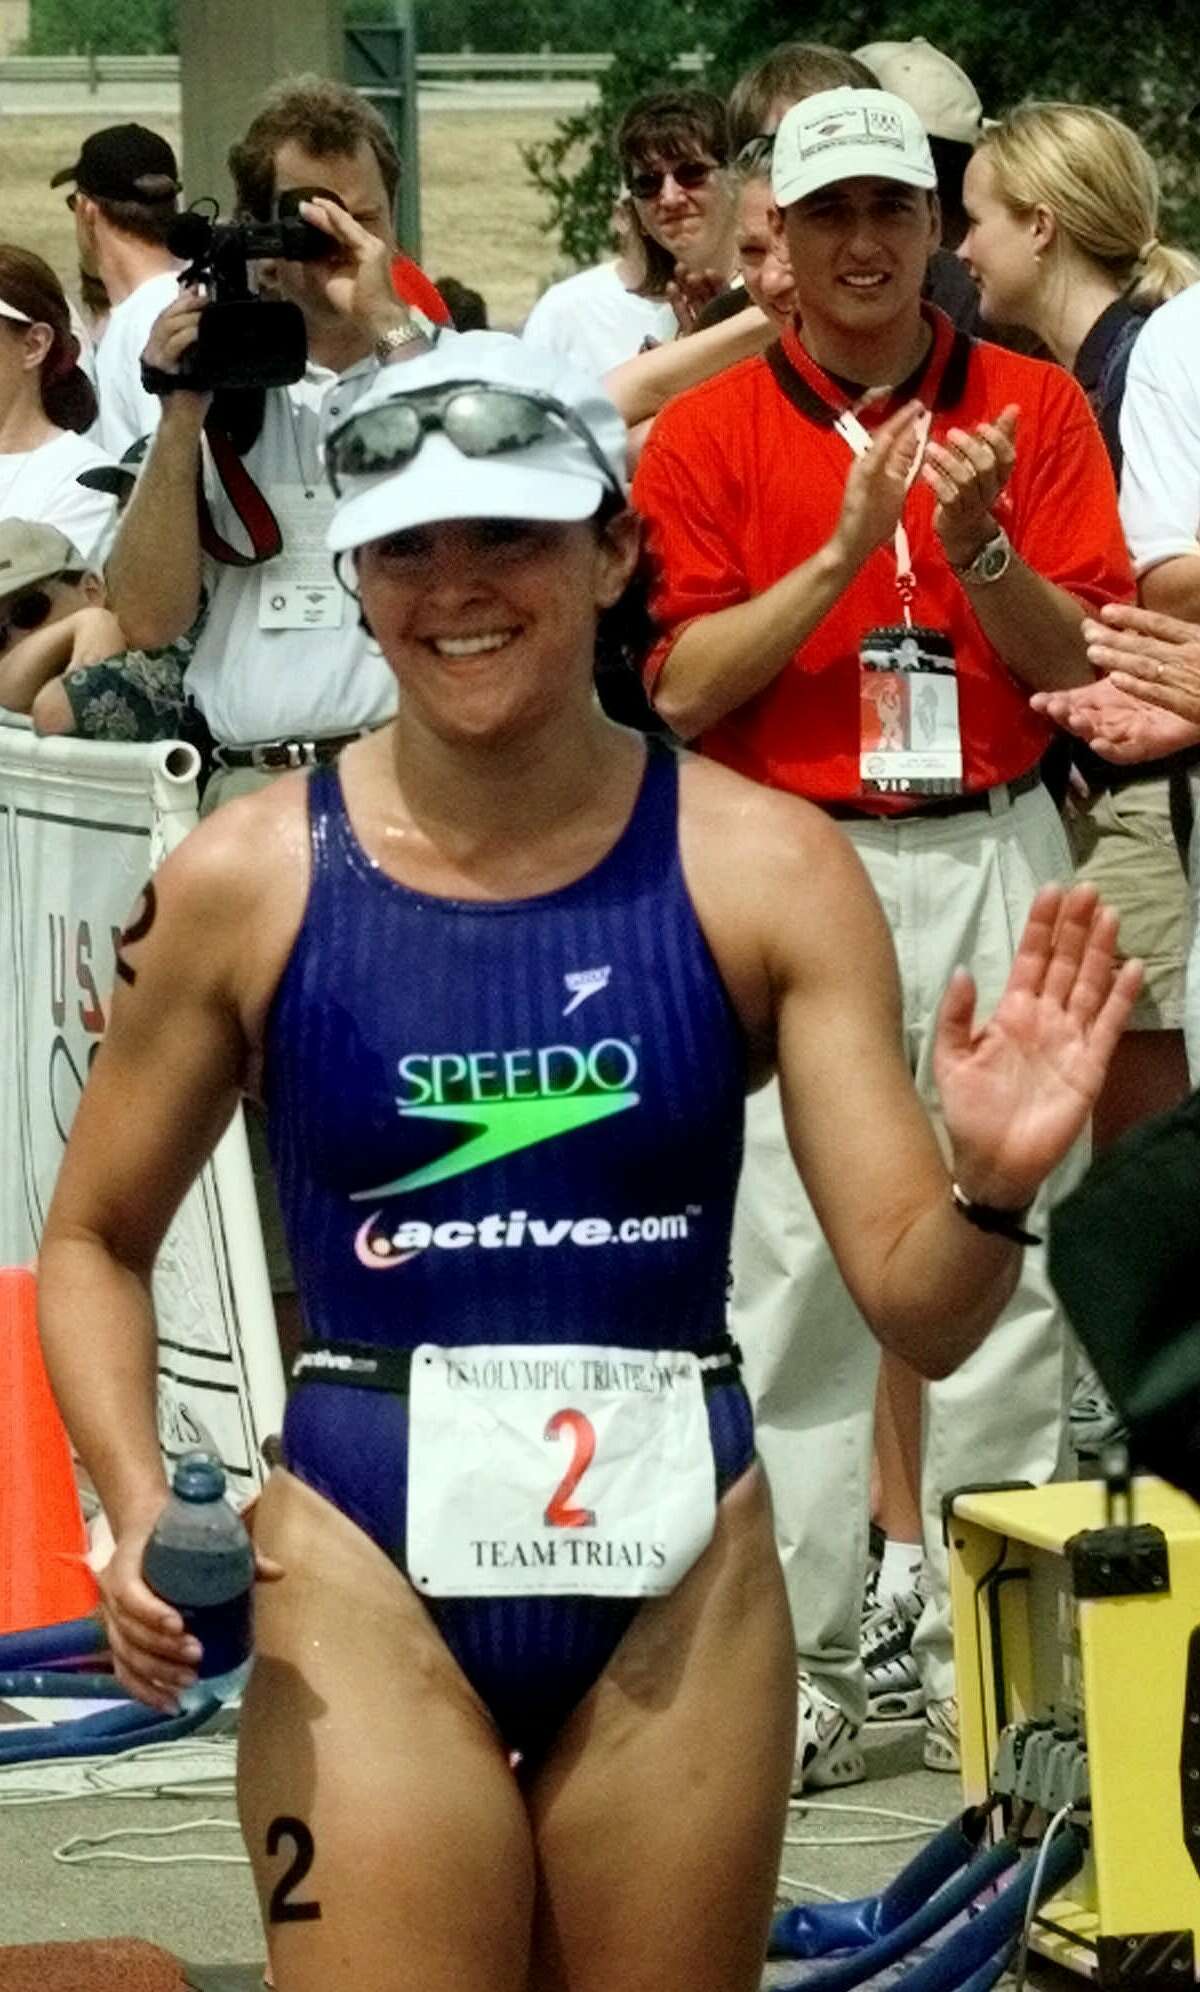 Jennifer Gutierrez, The graduate of Holmes High School competed at the first Olympic triathlon at the 2000 Summer Olympics. She was the first American to qualify for the event.